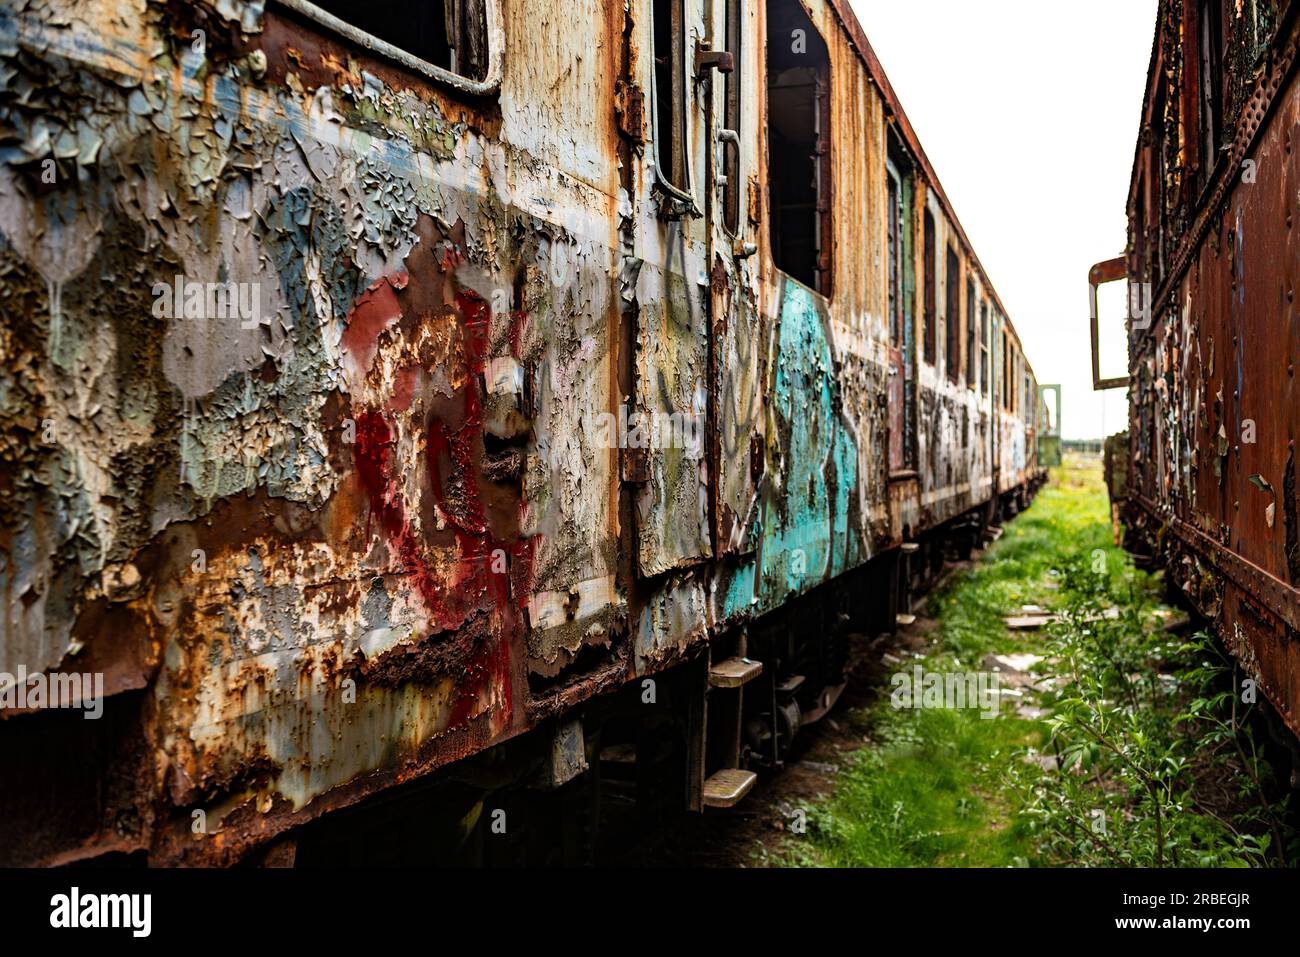 Perpective shot of old damaged trains and wagons, vintage background very shallow depth of field Stock Photo